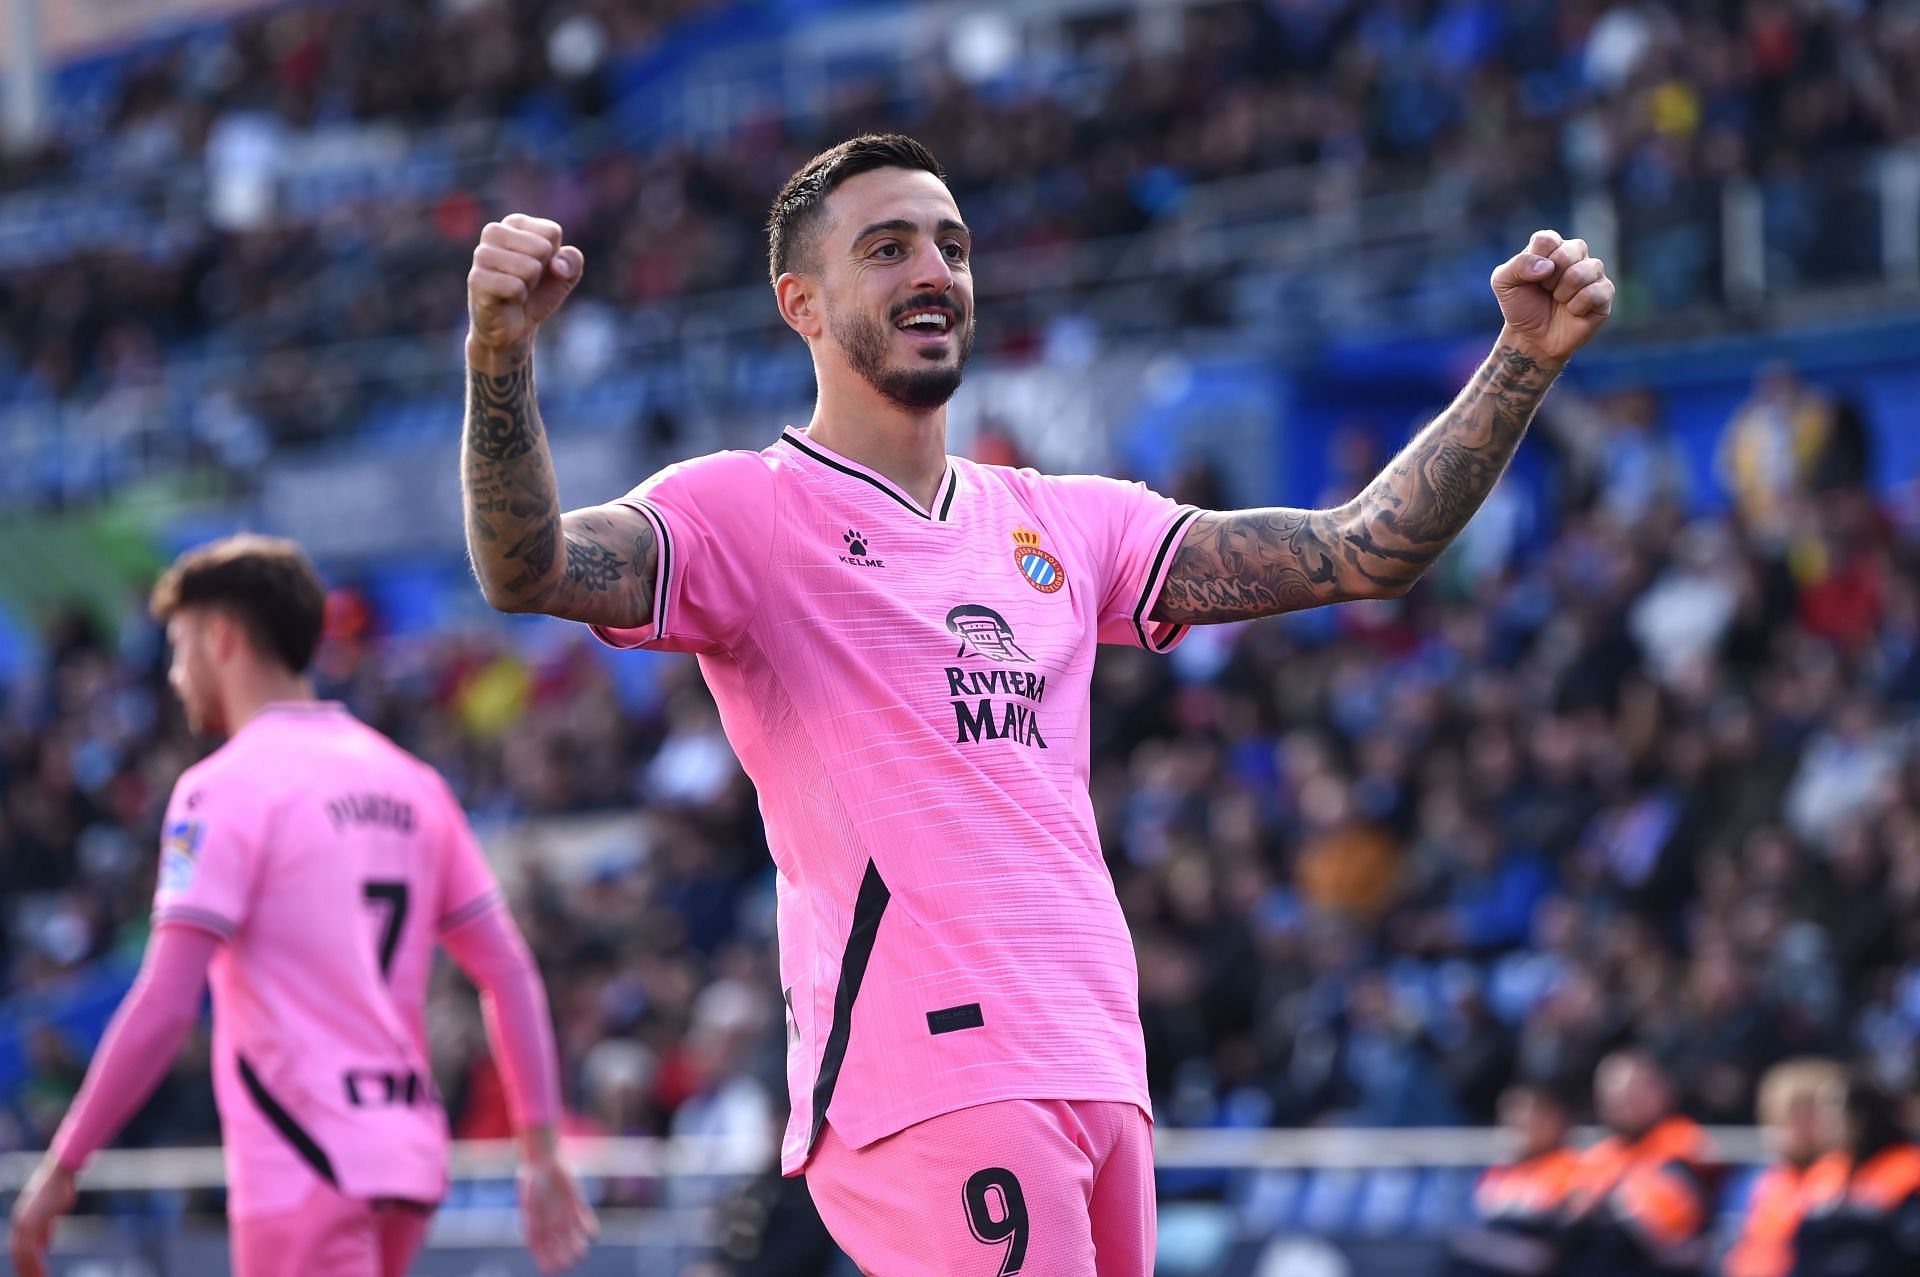 Joselu received his maiden call to represent his country